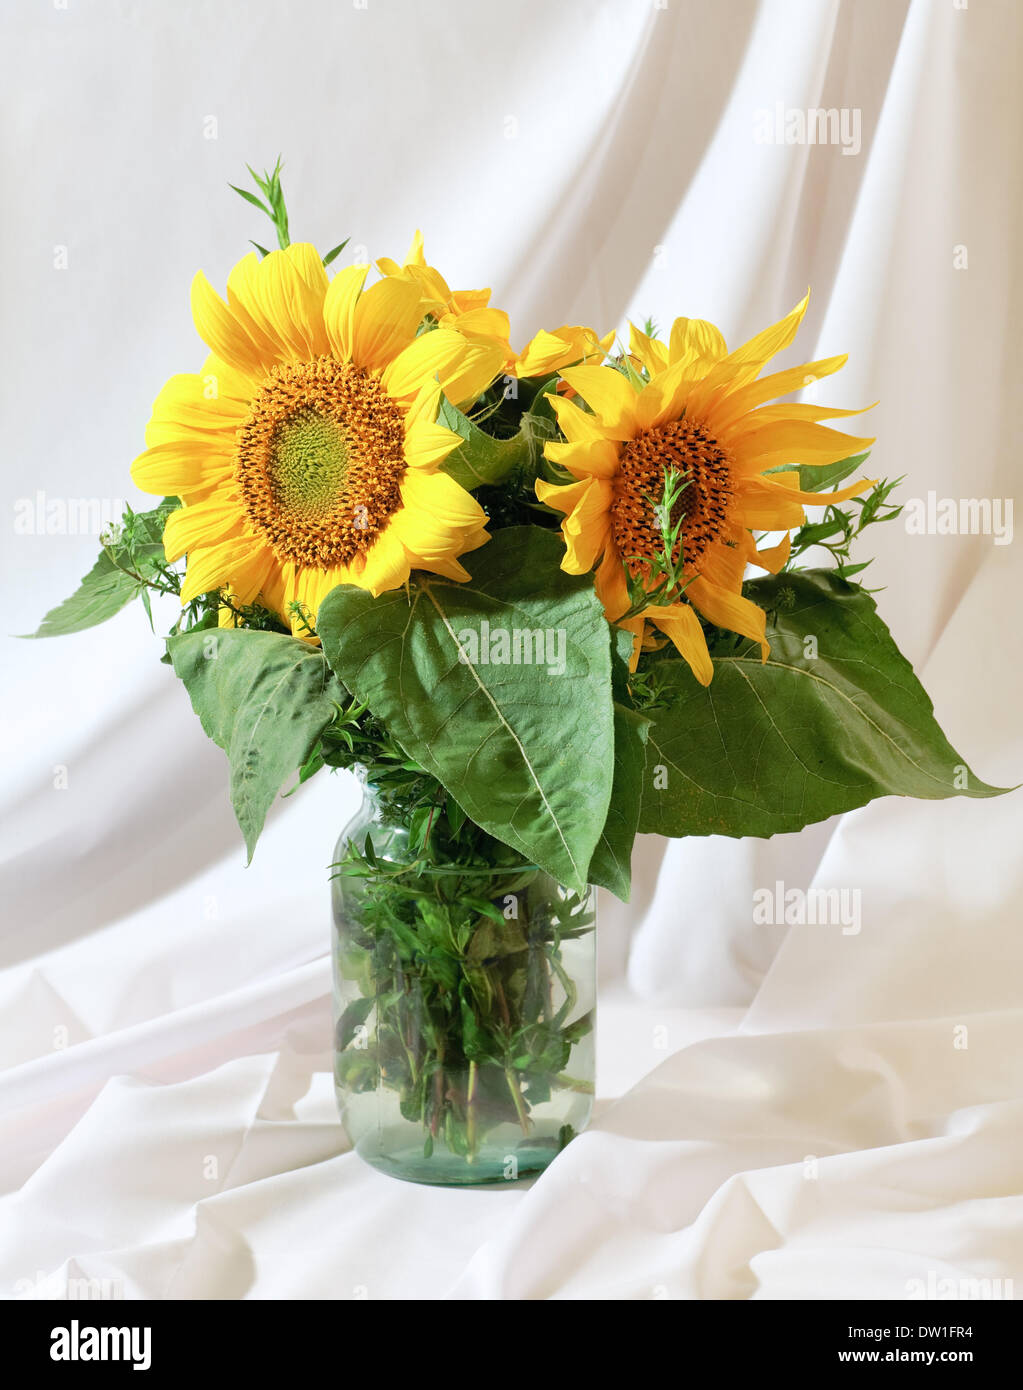 sunflower bouquet on white cloth background Stock Photo